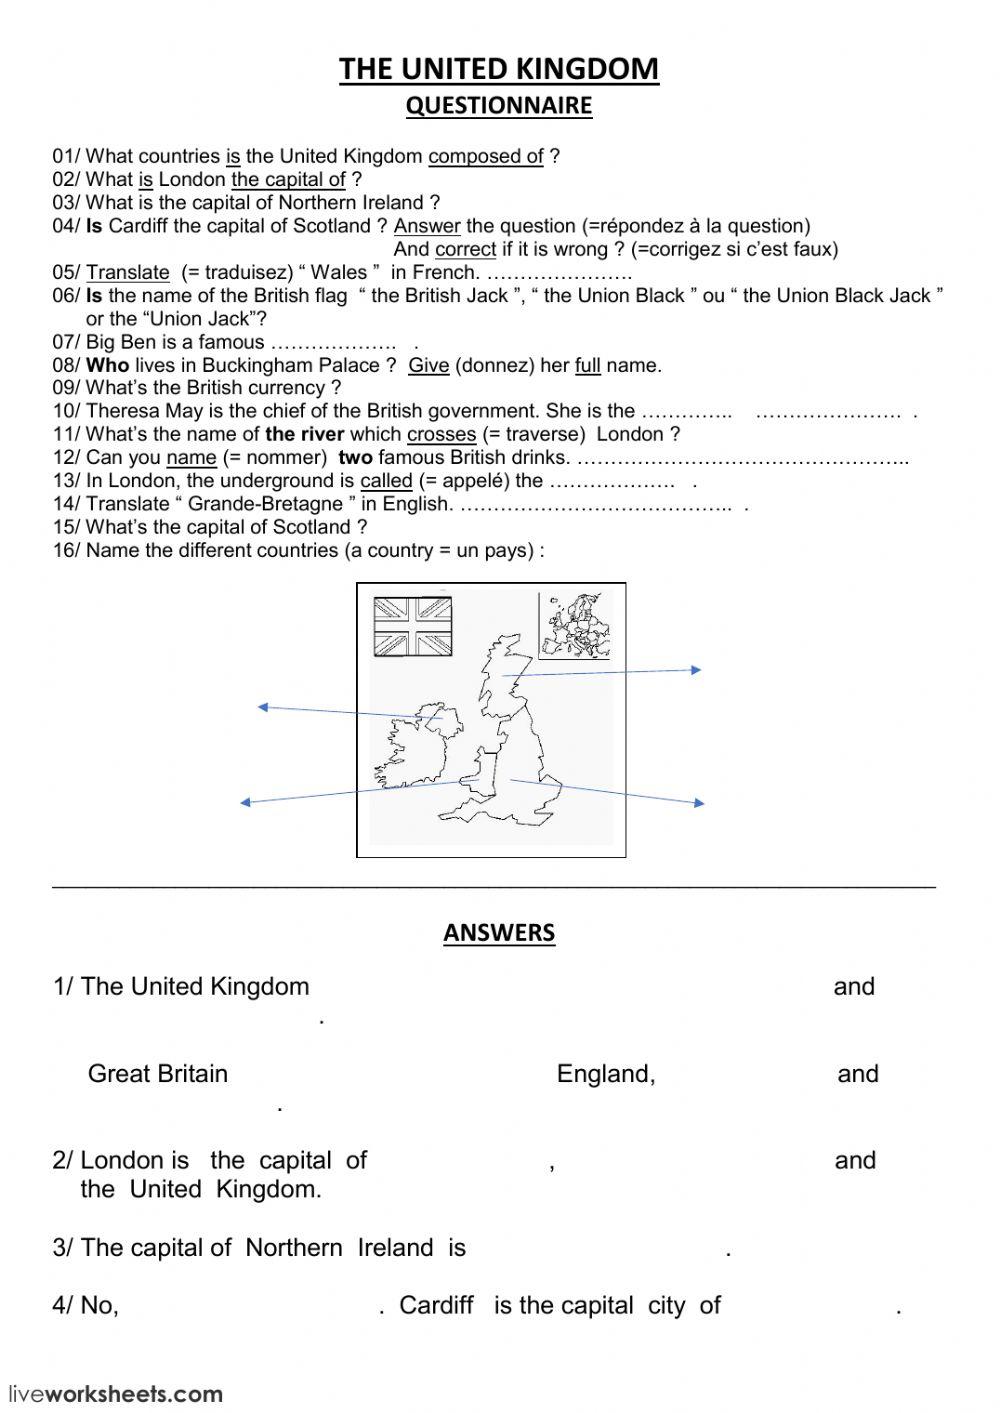 The United Kingdom - Questionnaire